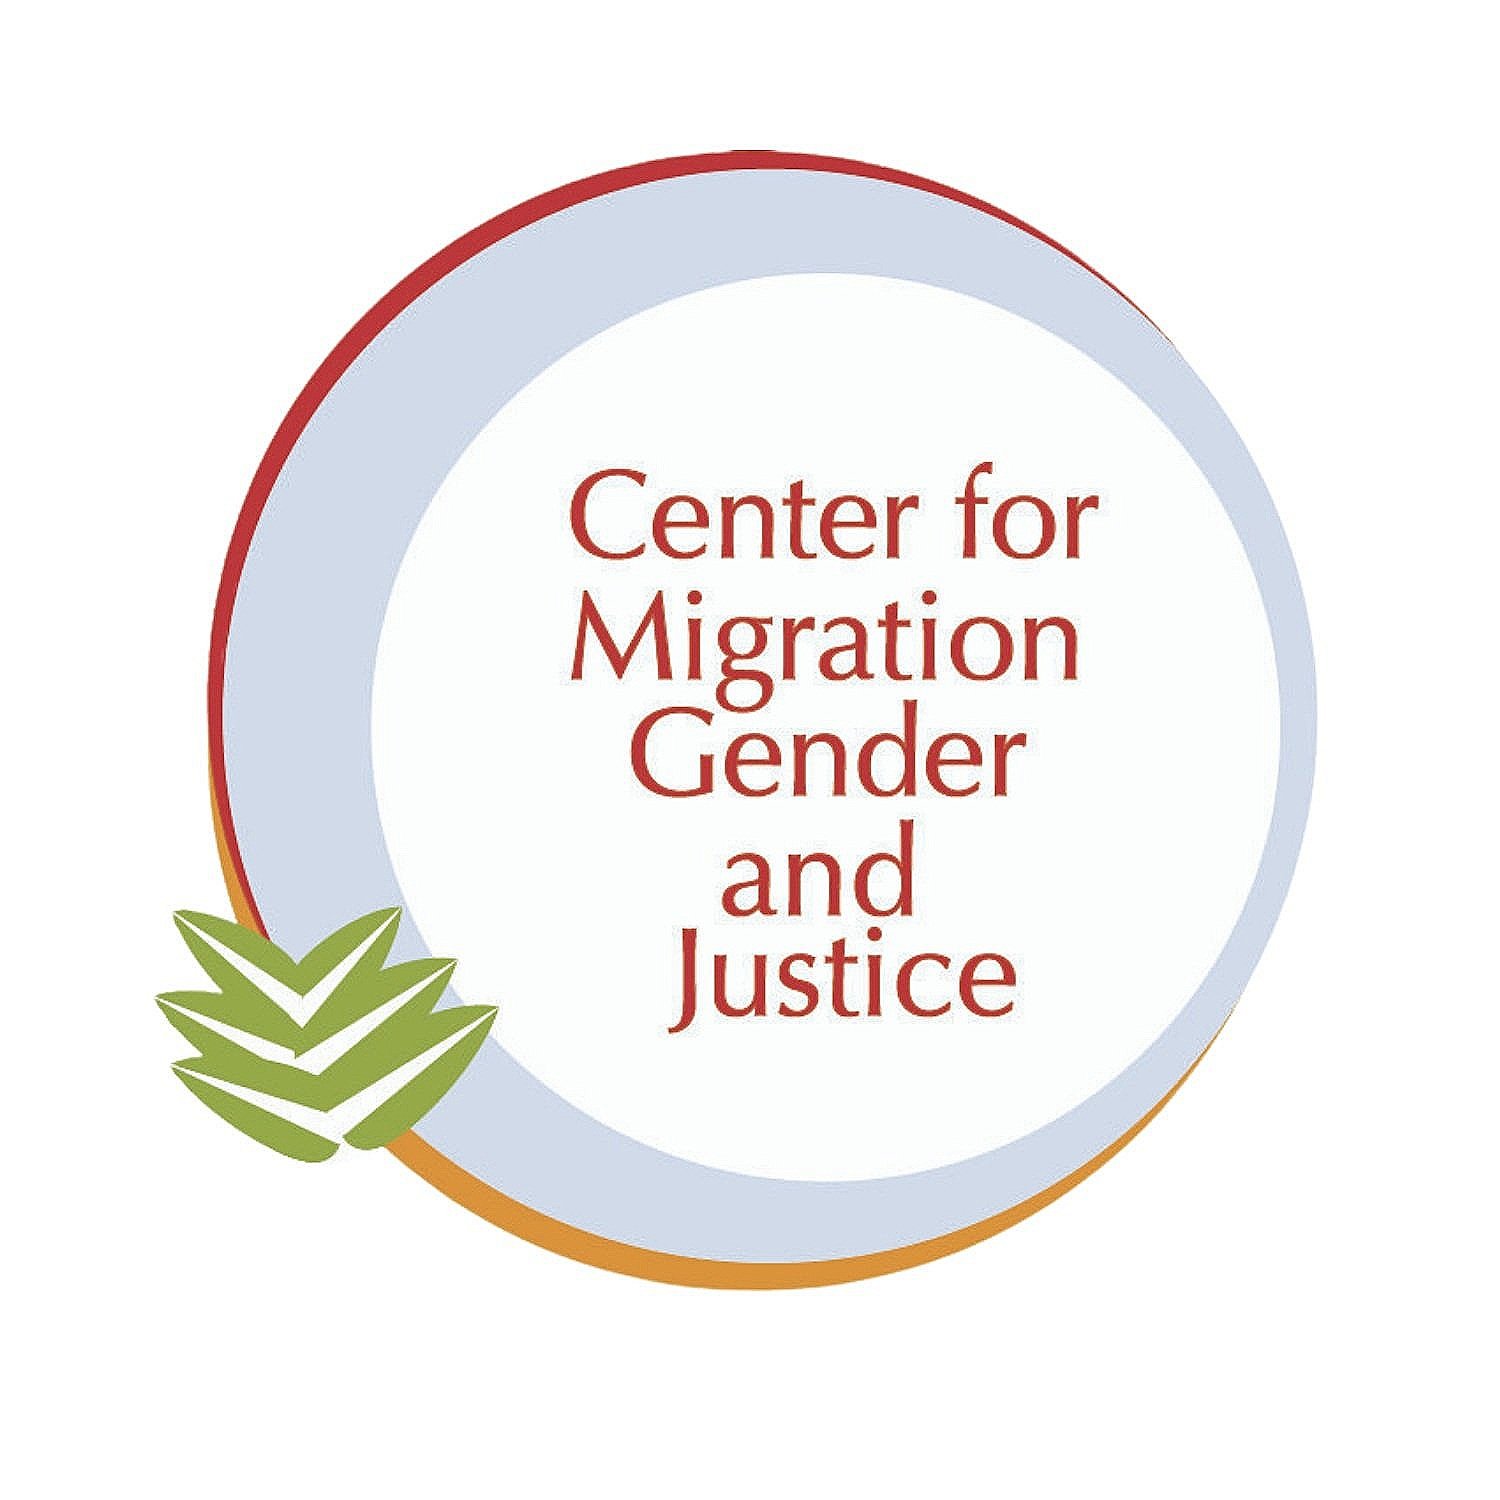 The Center for Migration, Gender, and Justice